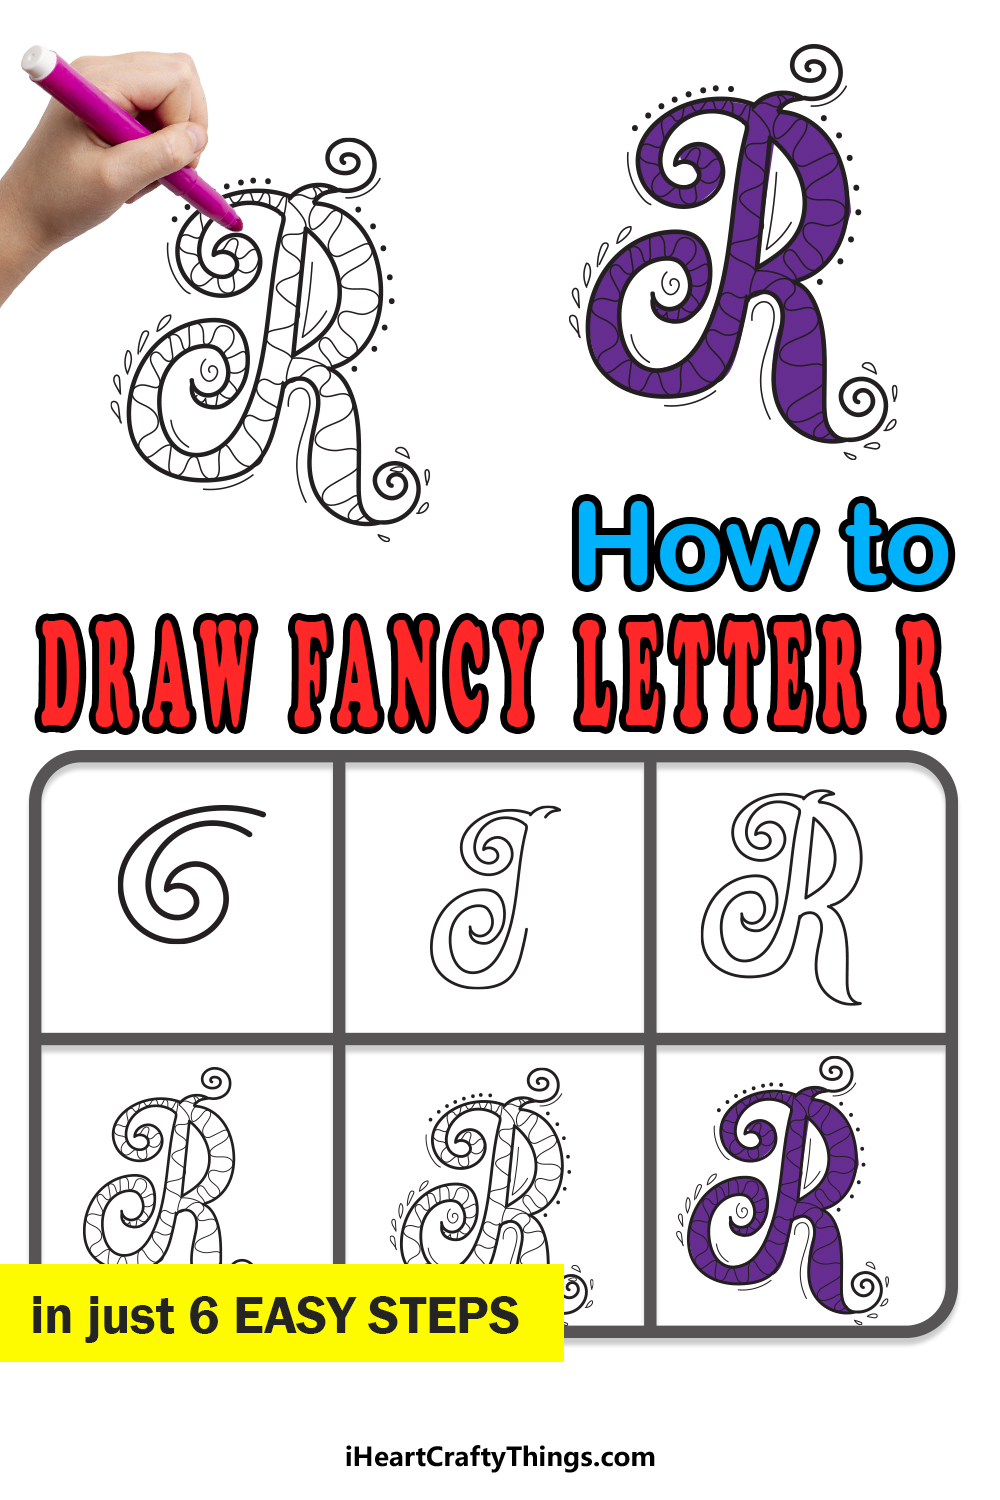 How To Draw Your Own Fancy R step by step guide